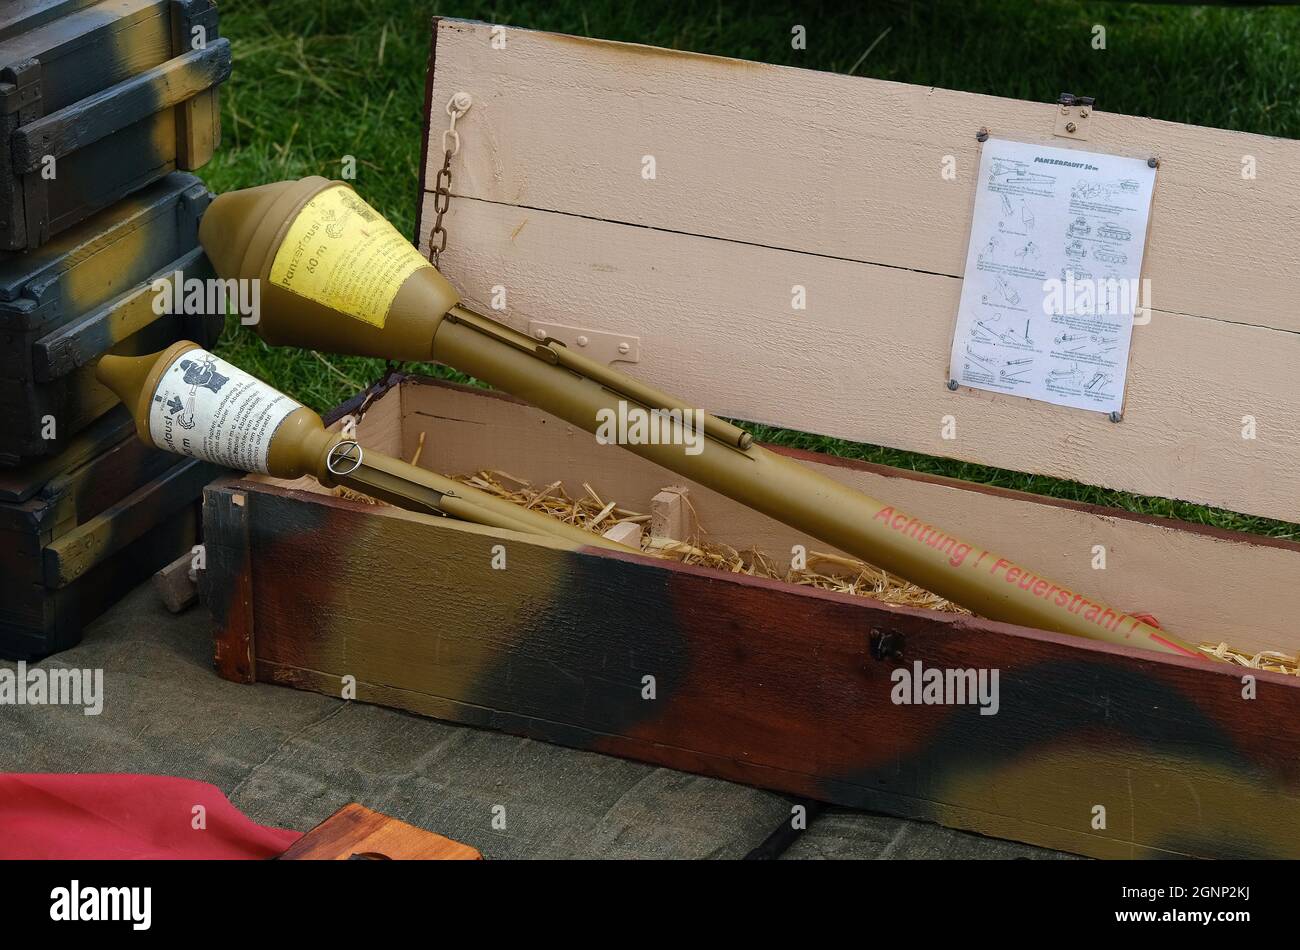 The Panzerfaust was an inexpensive, single shot, recoilless German anti-tank weapon of World War II. Shaped explosive charge. Stock Photo